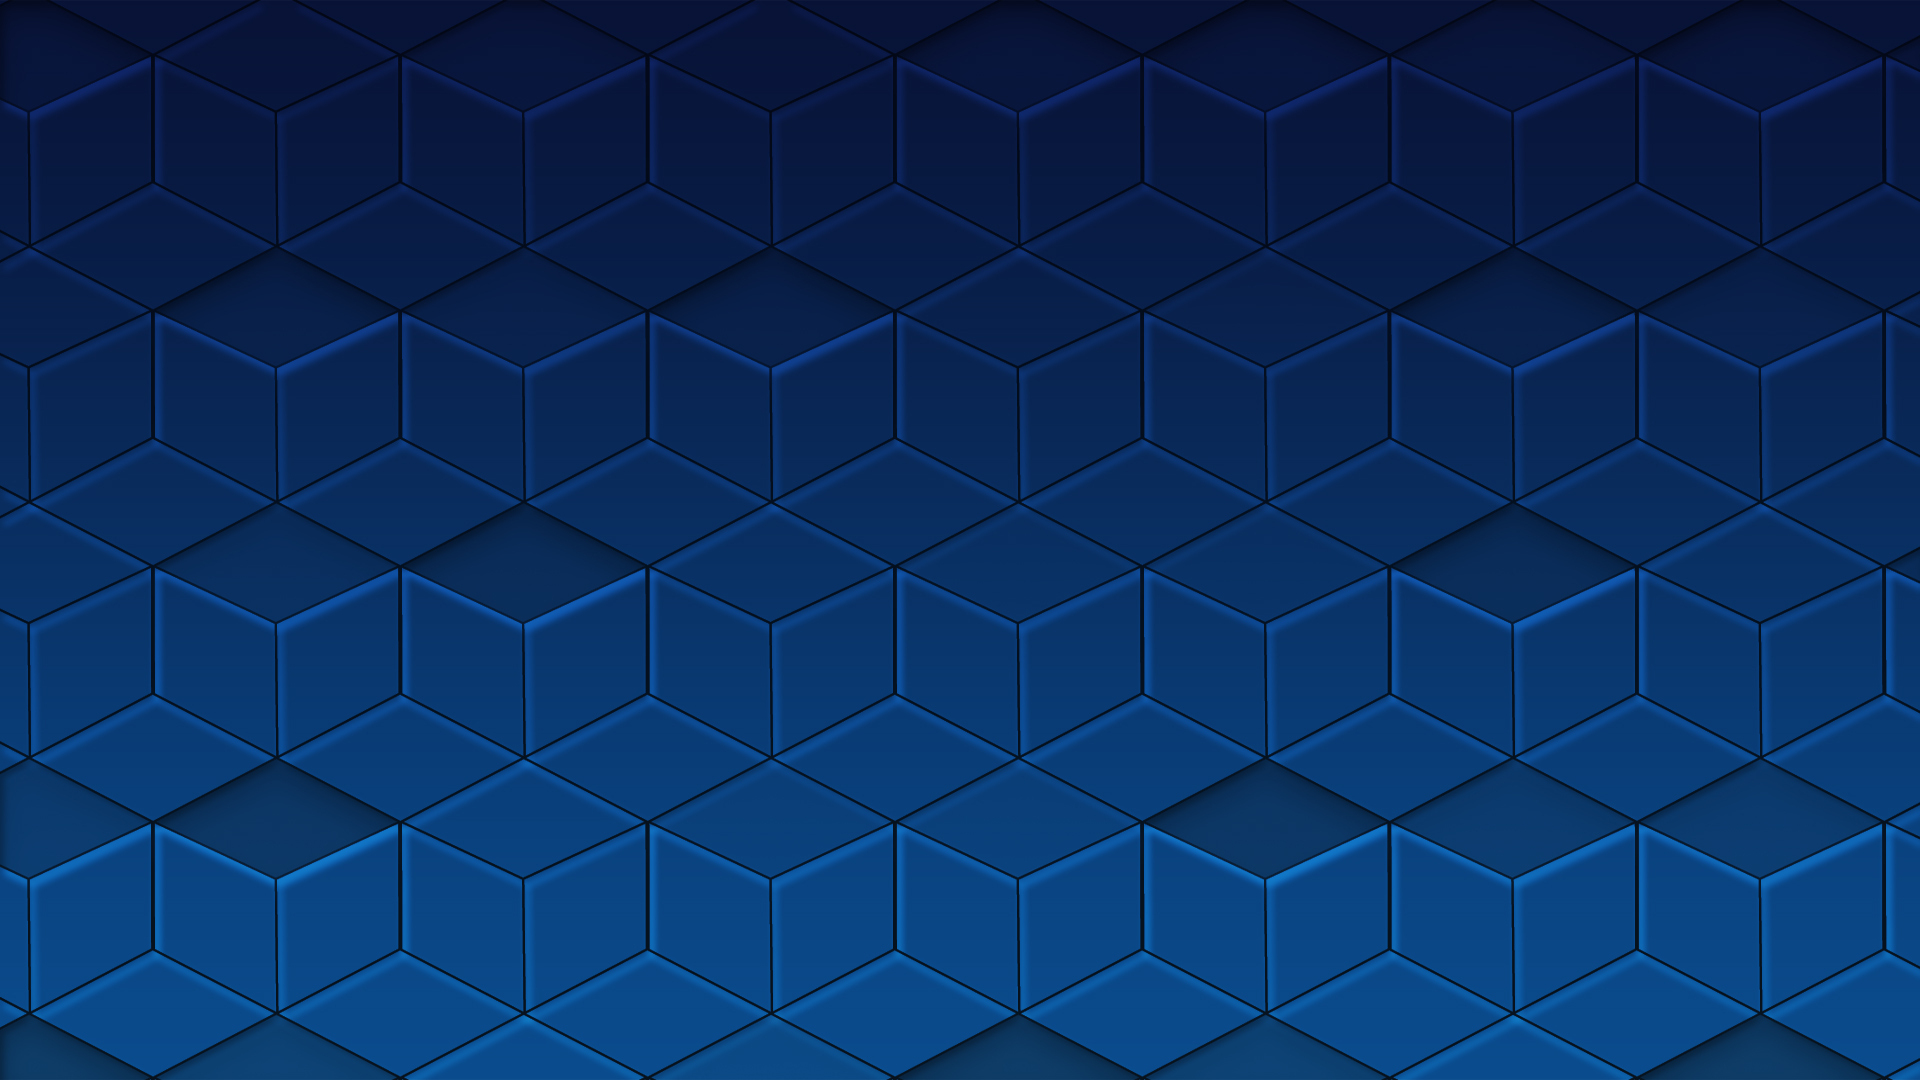 Wallpapers patterns texture blue on the desktop